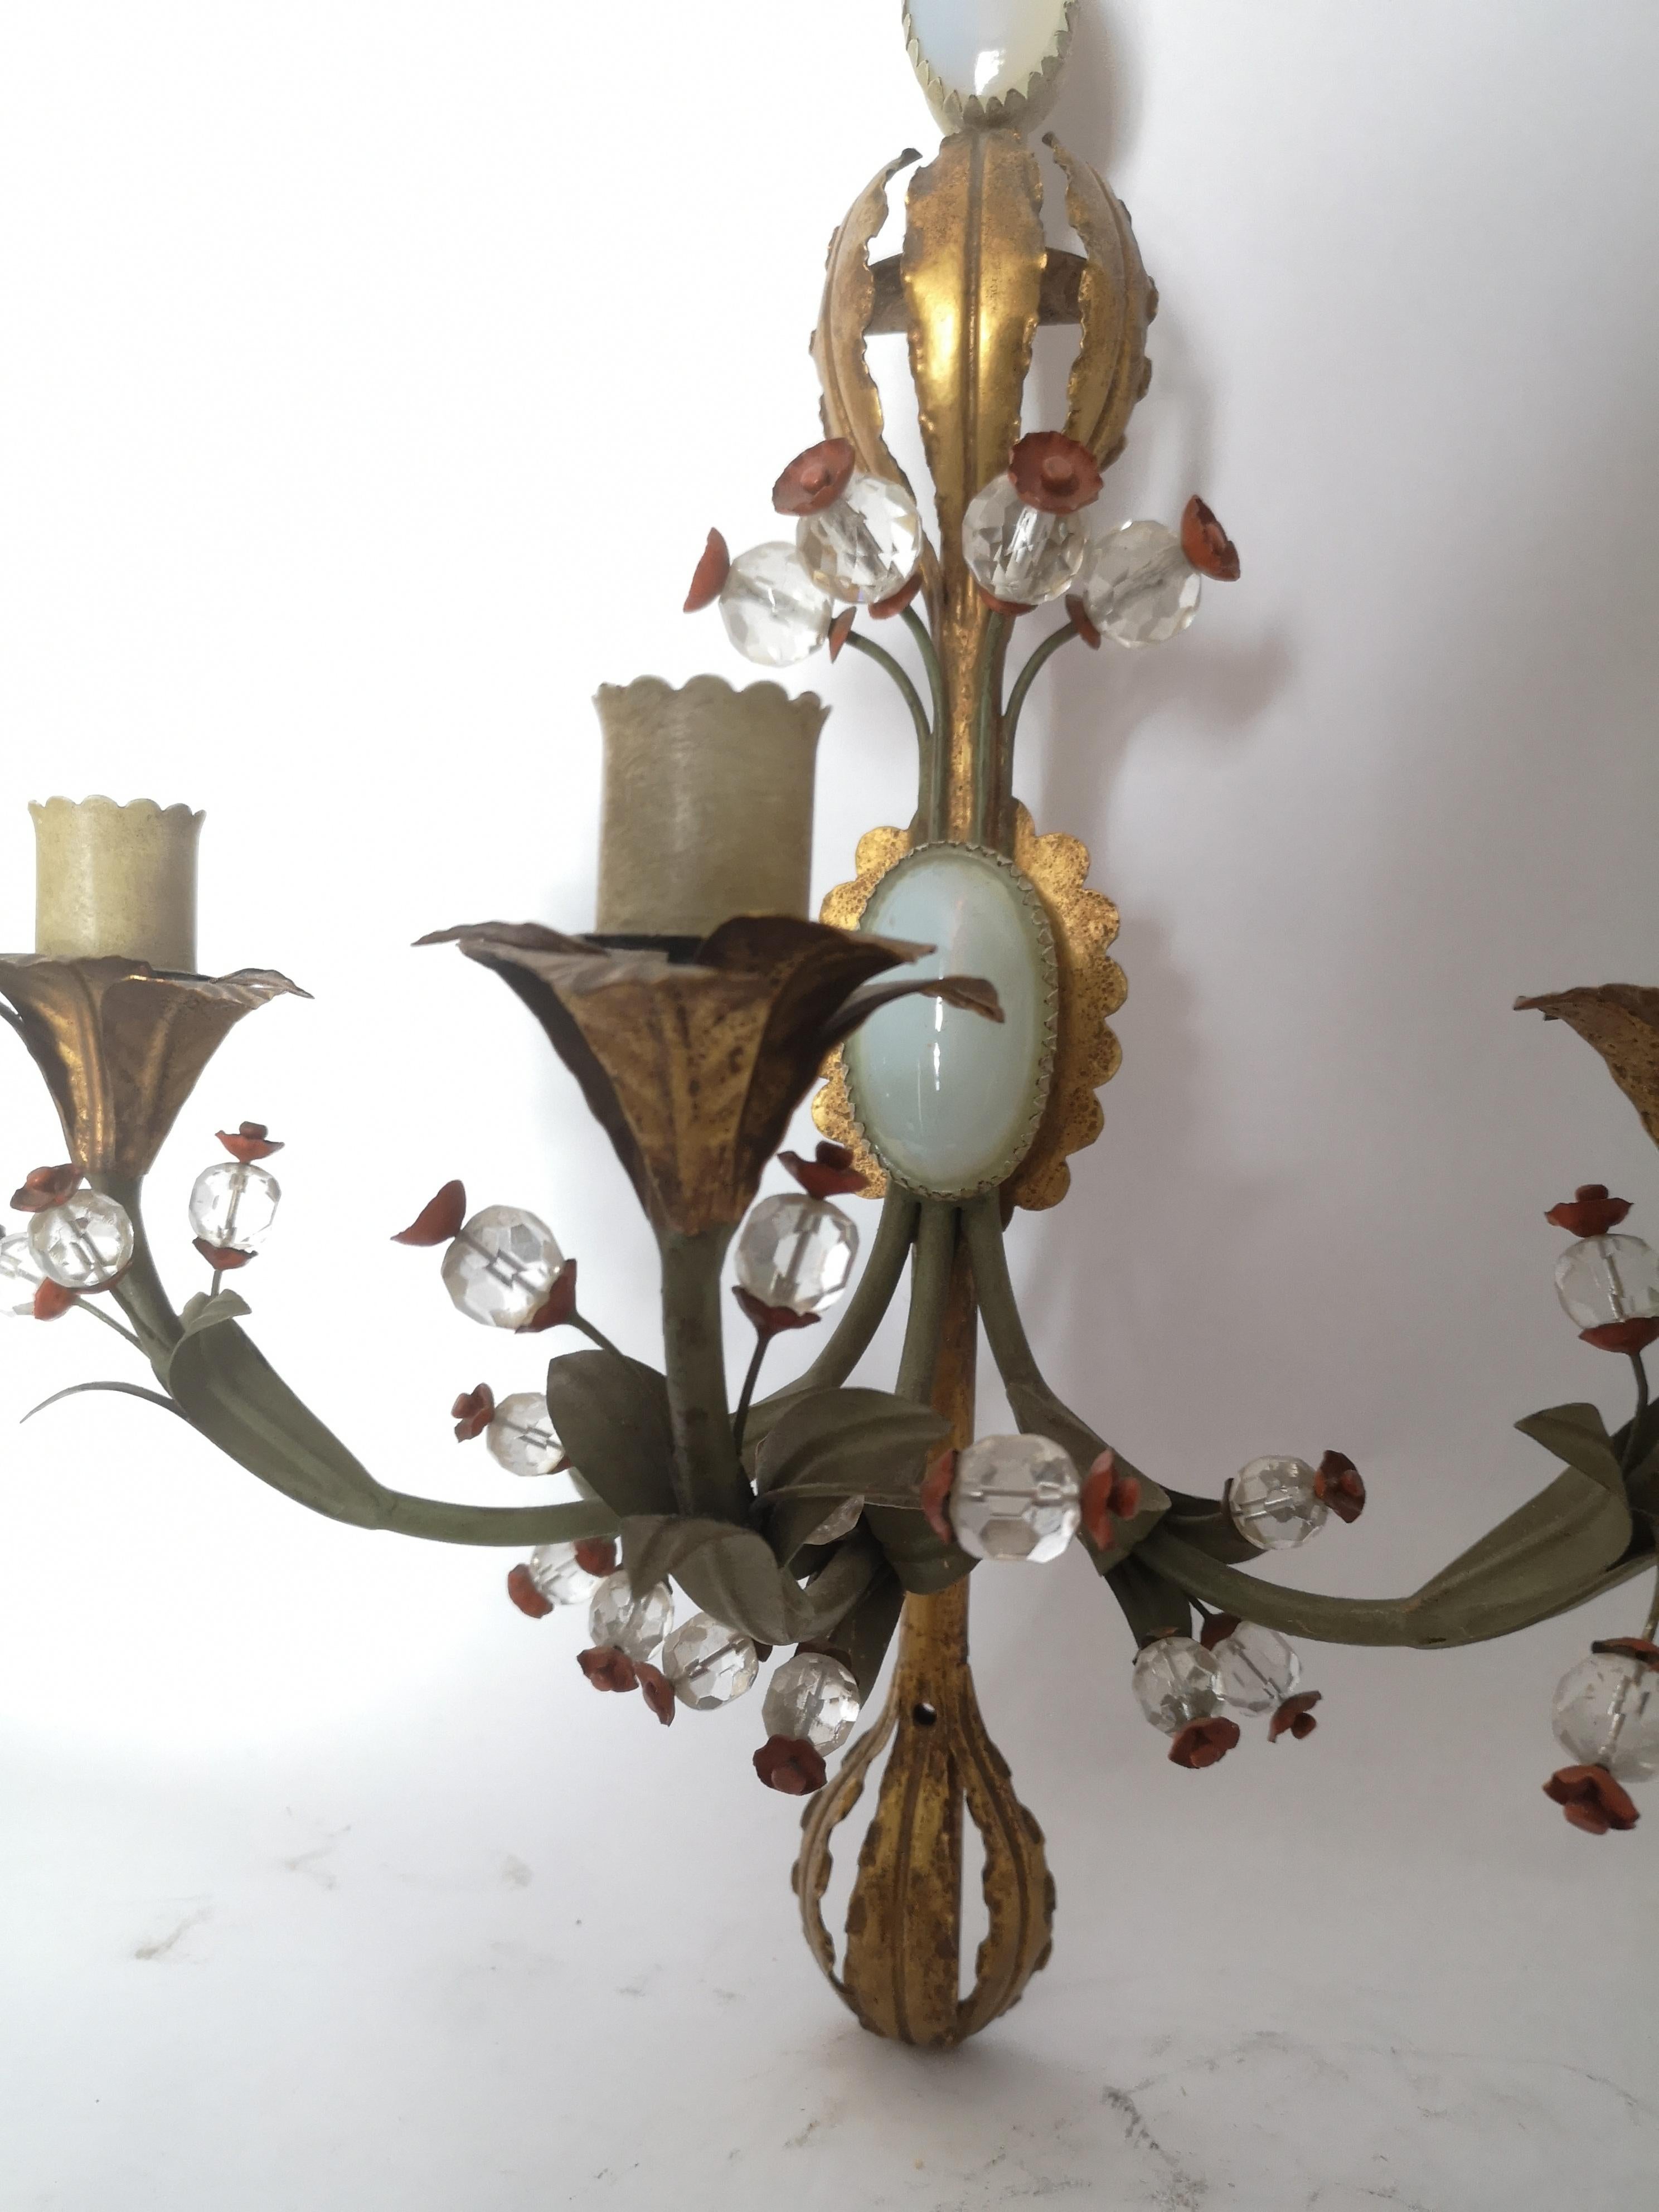 Pair of very decorative early 20th century Italian toleware wall lights. Each with three sconces for bulbs, in original green and gold painted metal, inset two opaline panels and glass beads with red metal flowers.
Can be wired for your country of